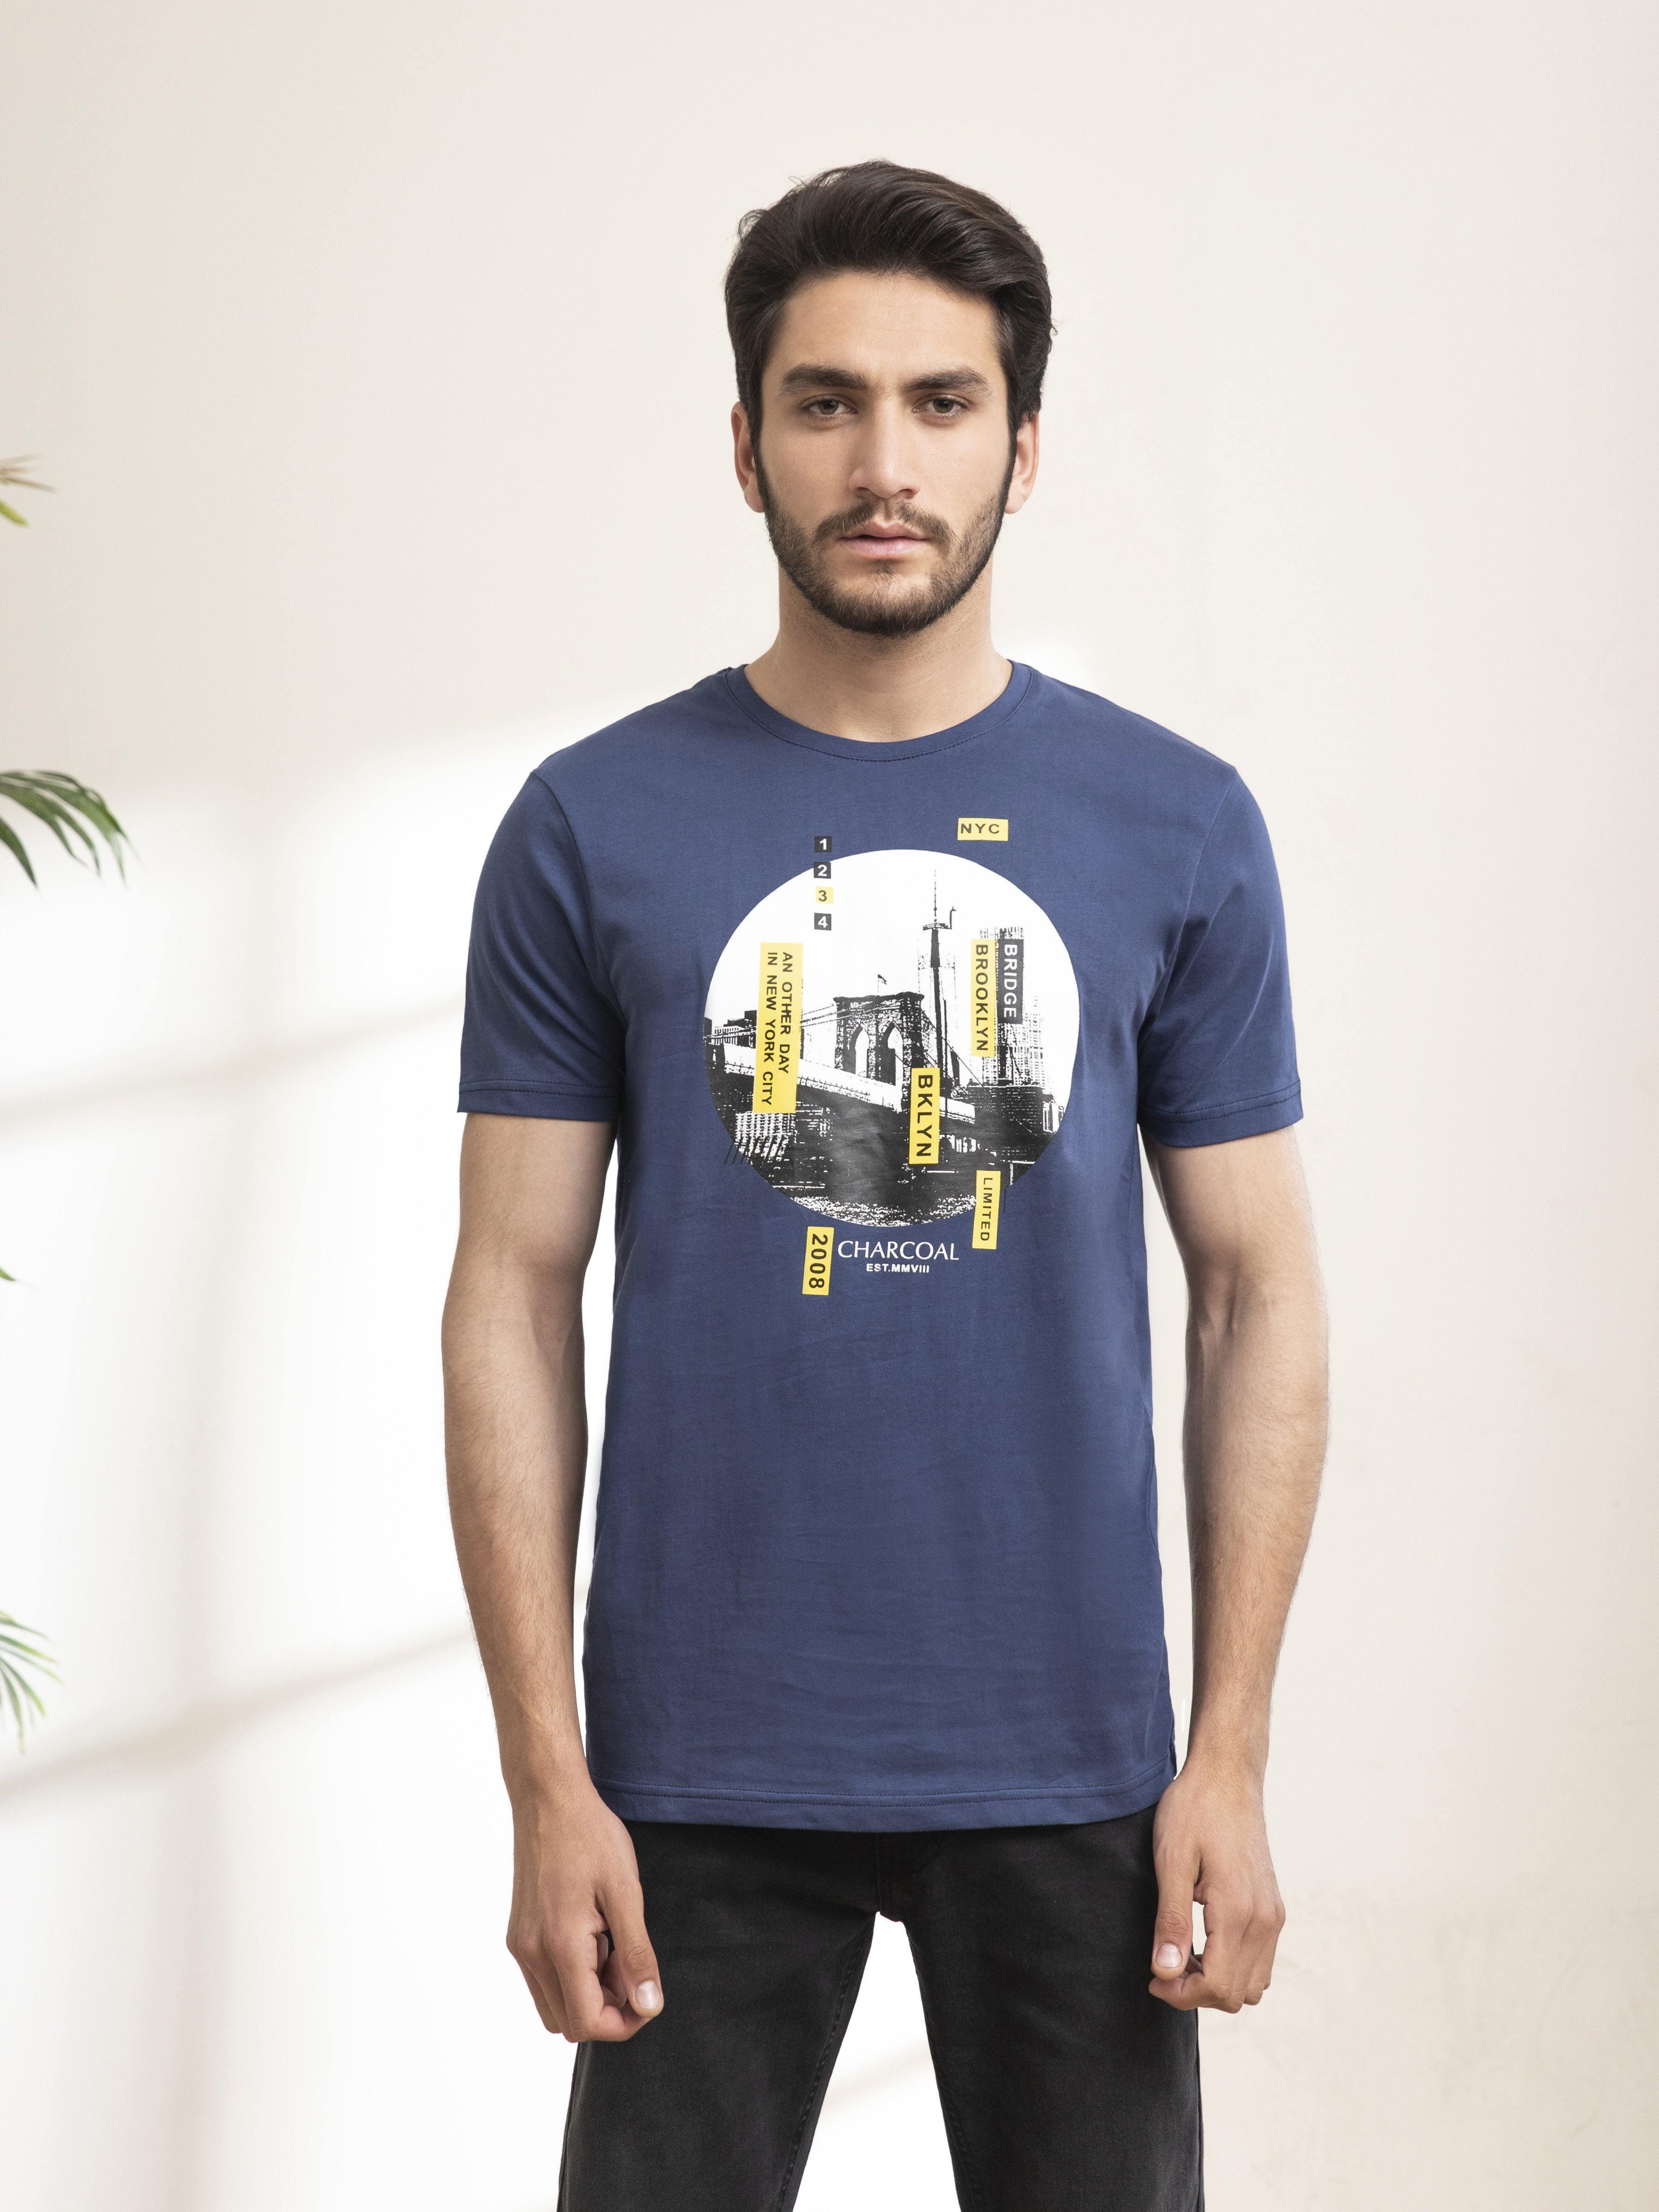 GRAPHIC T SHIRT CREW NECK NAVY BLUE at Charcoal Clothing